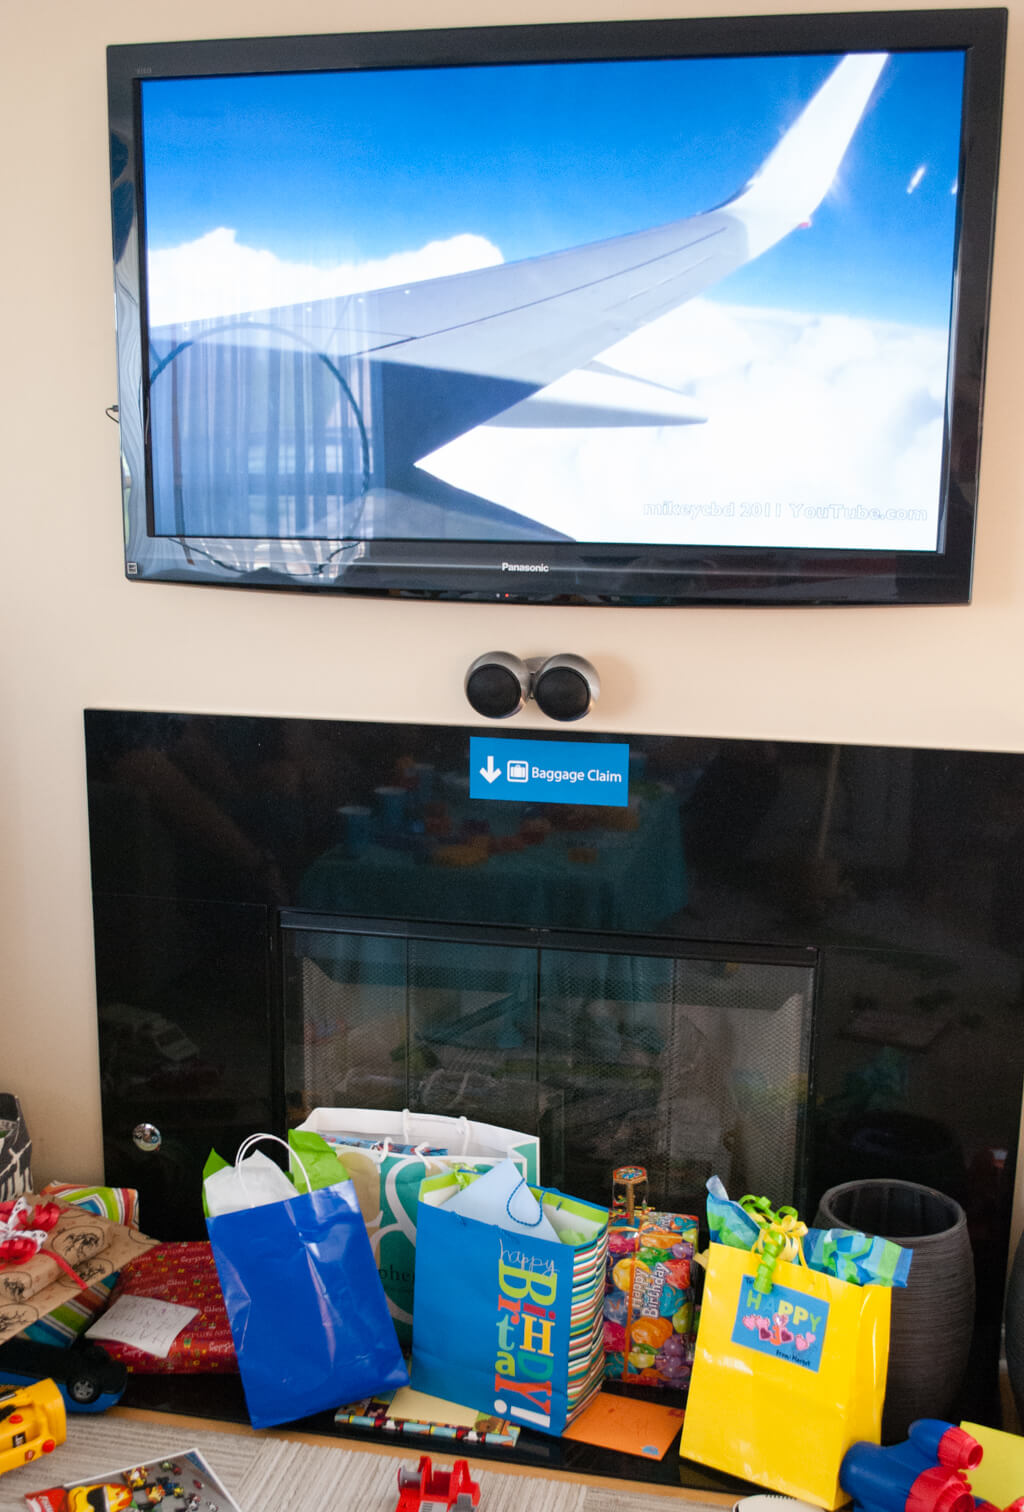 We put a baggage claim sign below the TV (looping an airplane video) for guests to drop off birthday presents